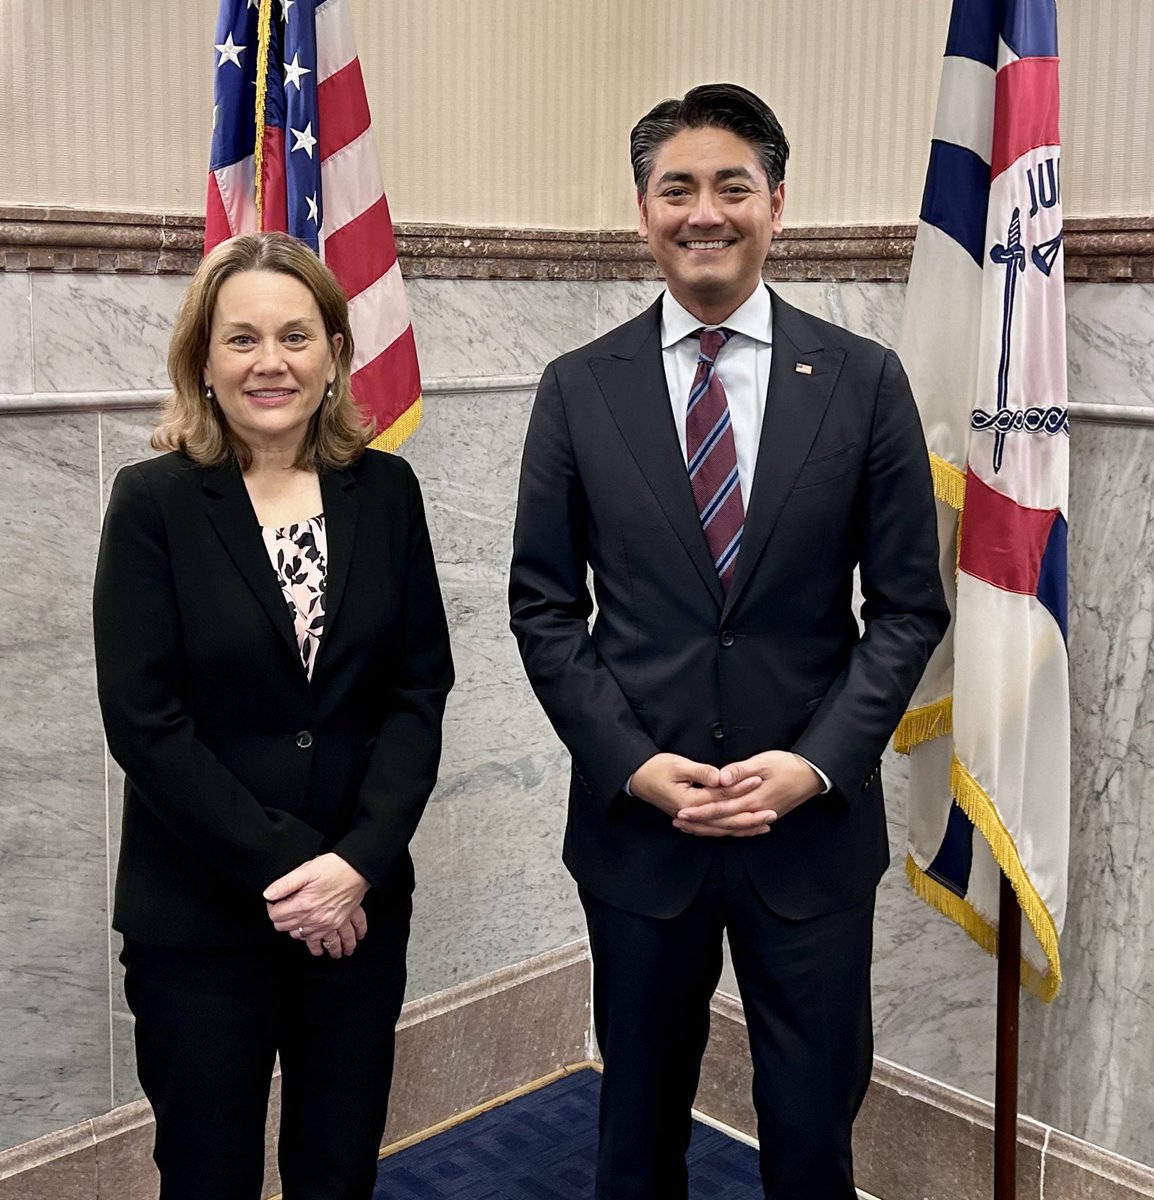 It was a pleasure to meet with Cincinnati’s Mayor @AftabPureval. We discussed the upcoming #NATOSummit in Washington D.C. and how the @NATO Alliance benefits all Americans in terms of our safety, our prosperity, and our way of life.